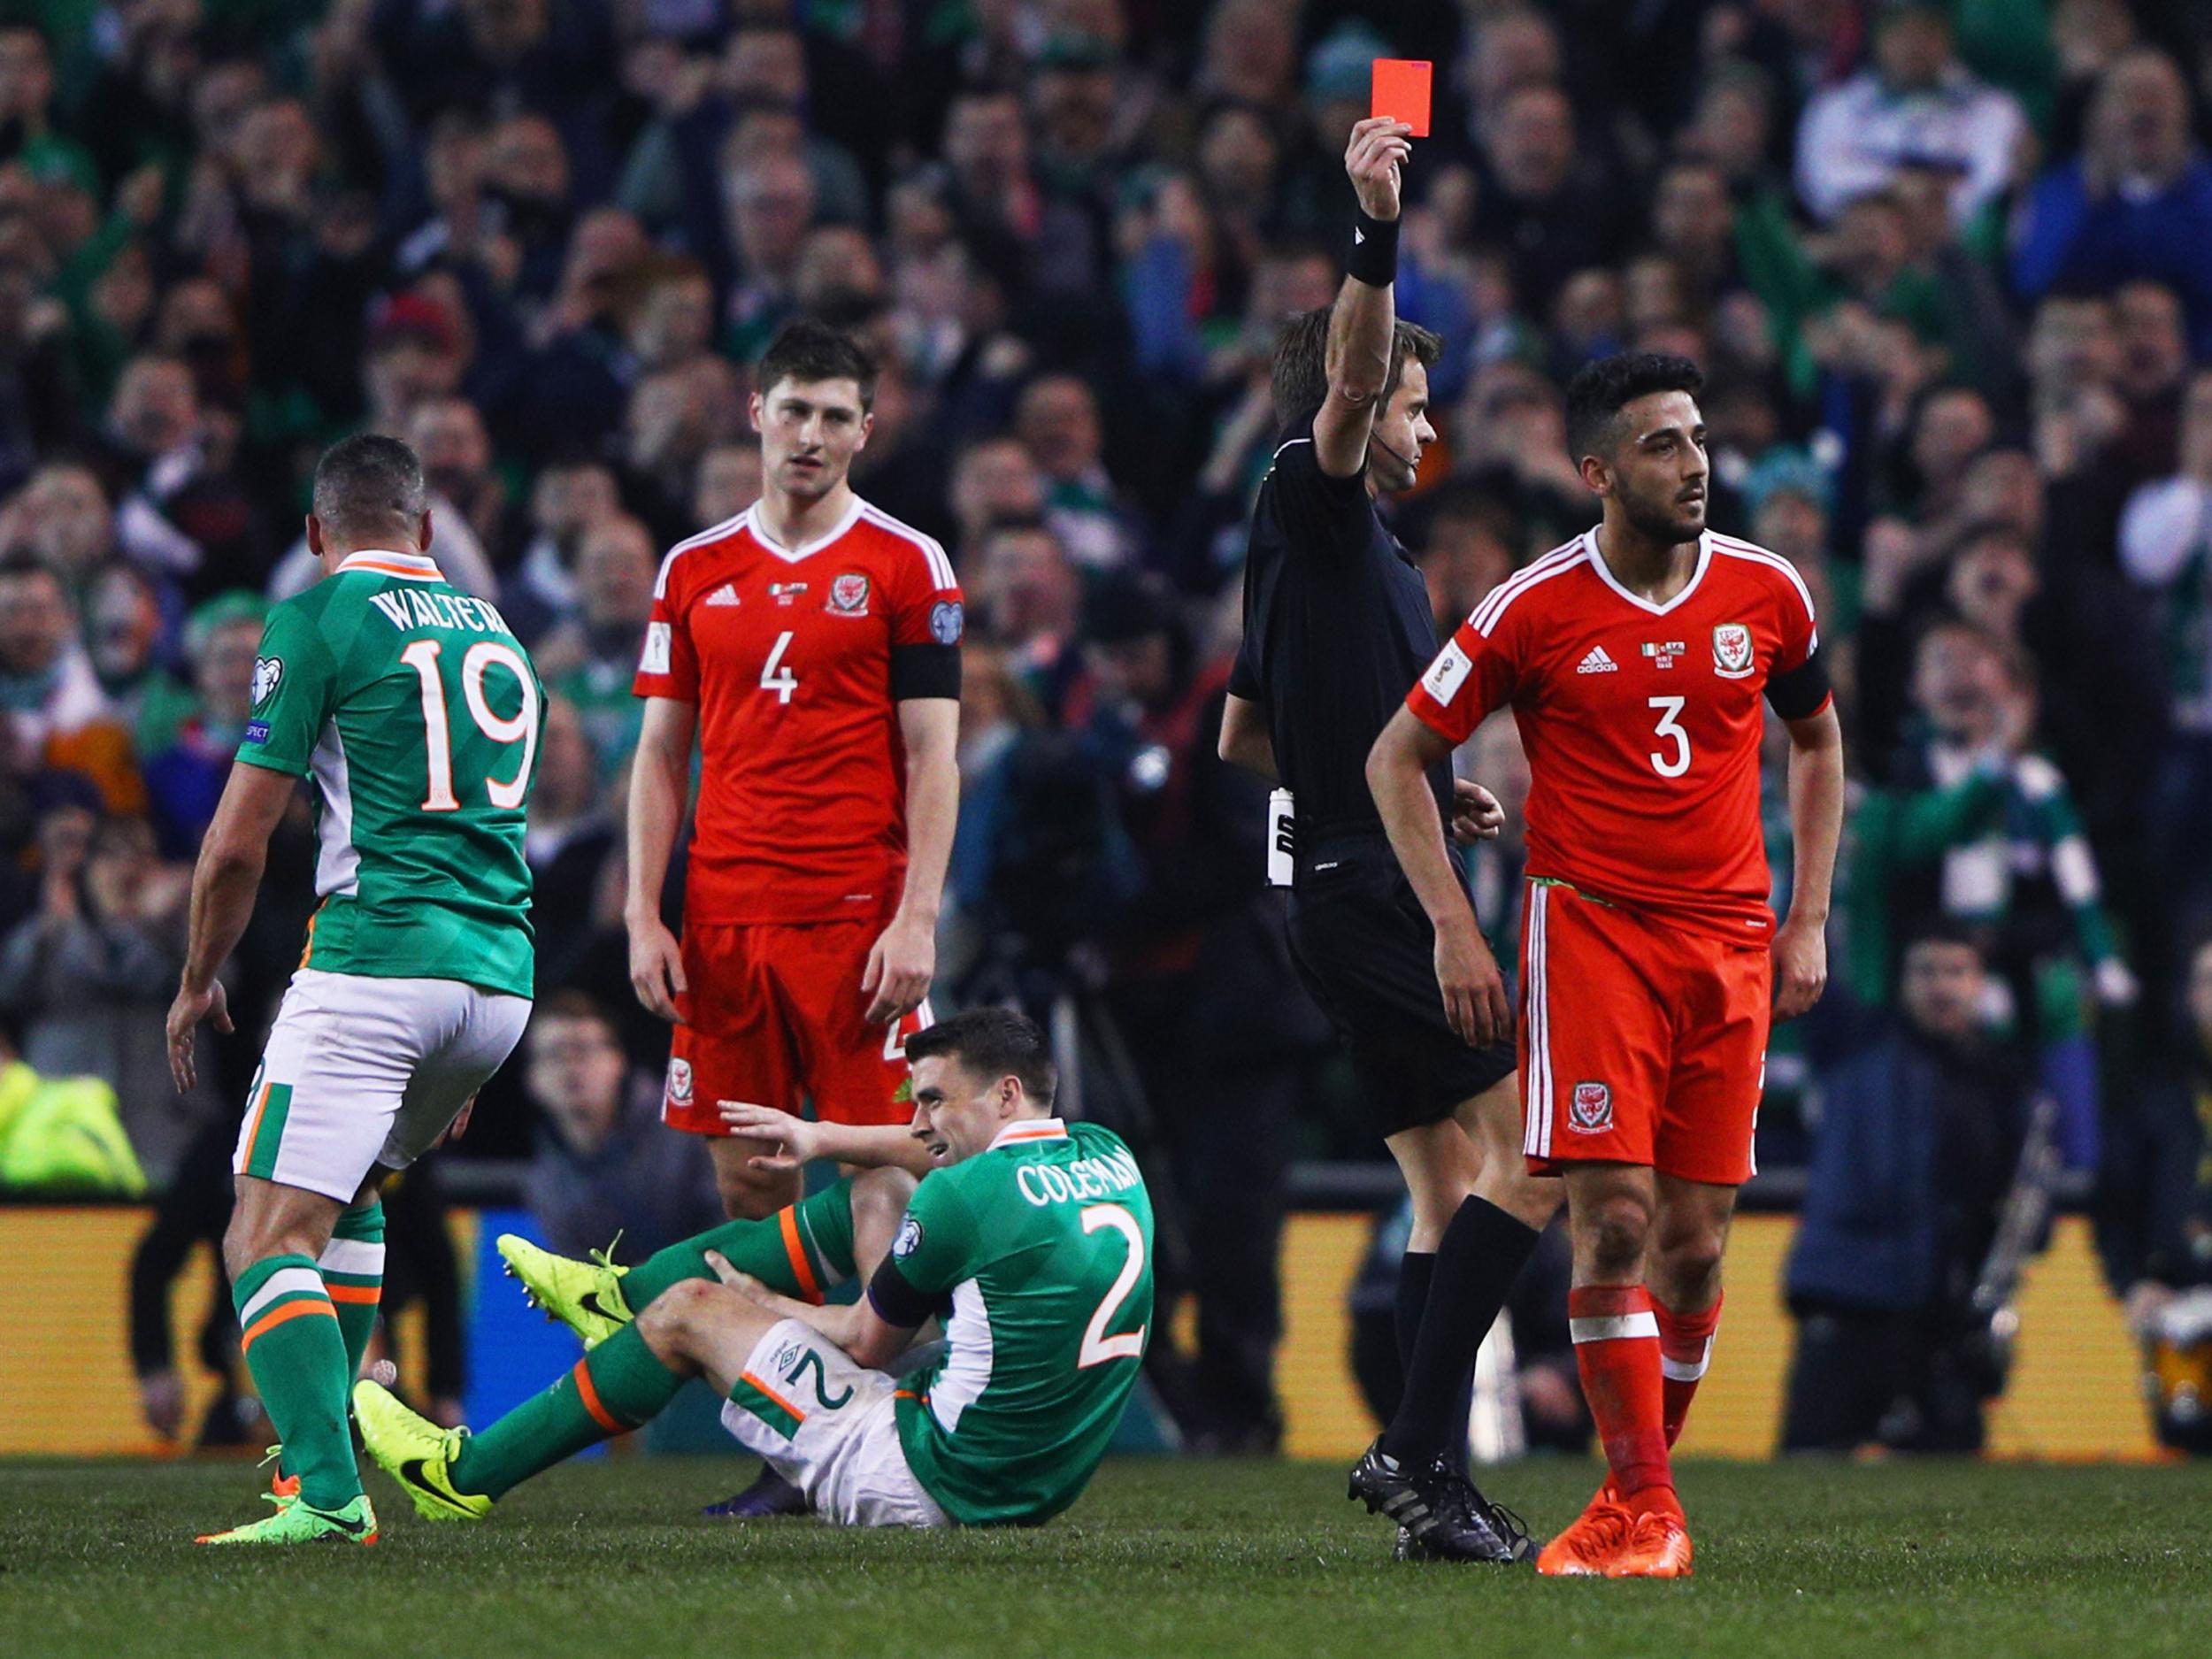 Wales full-back Neil Taylor was sent off for a tackle on Ireland's Seamus Coleman in March